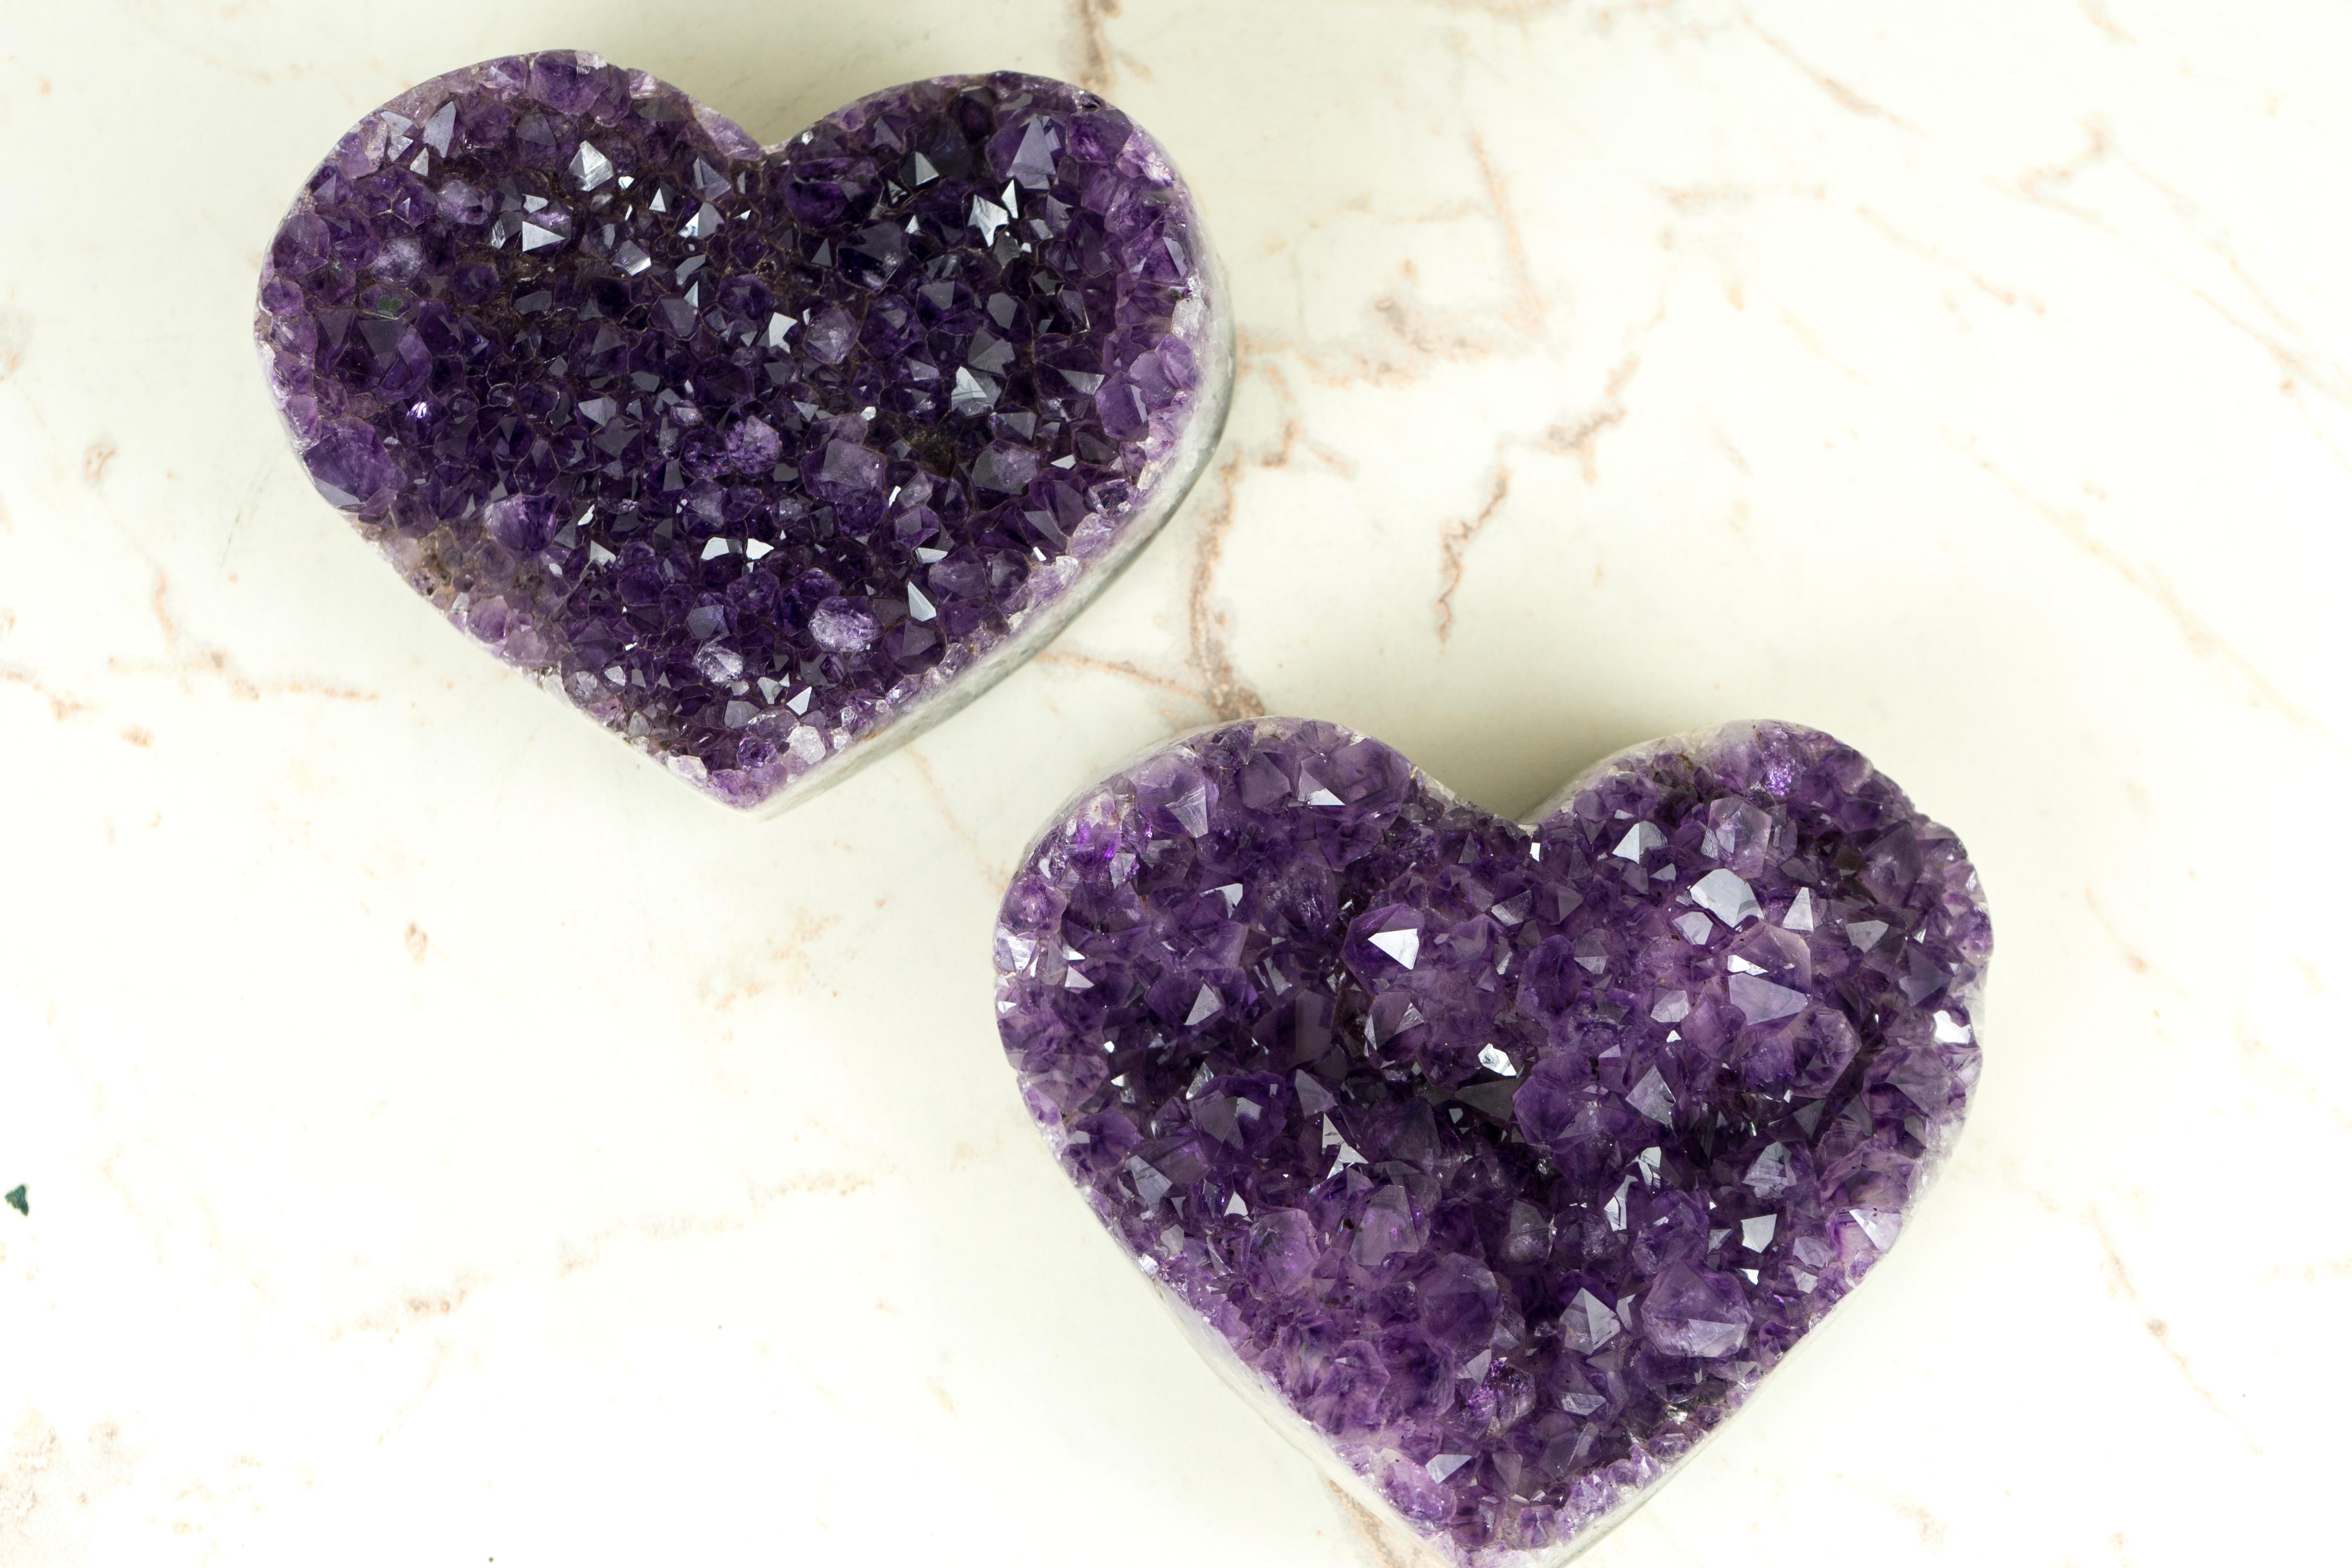 We selected this set of Amethyst Hearts with high quality, deep color, and the overall beauty and shine of the hearts in mind. With each heart having its particular rare characteristics such as Amethyst Flowers, Golden Goethite inclusions, and